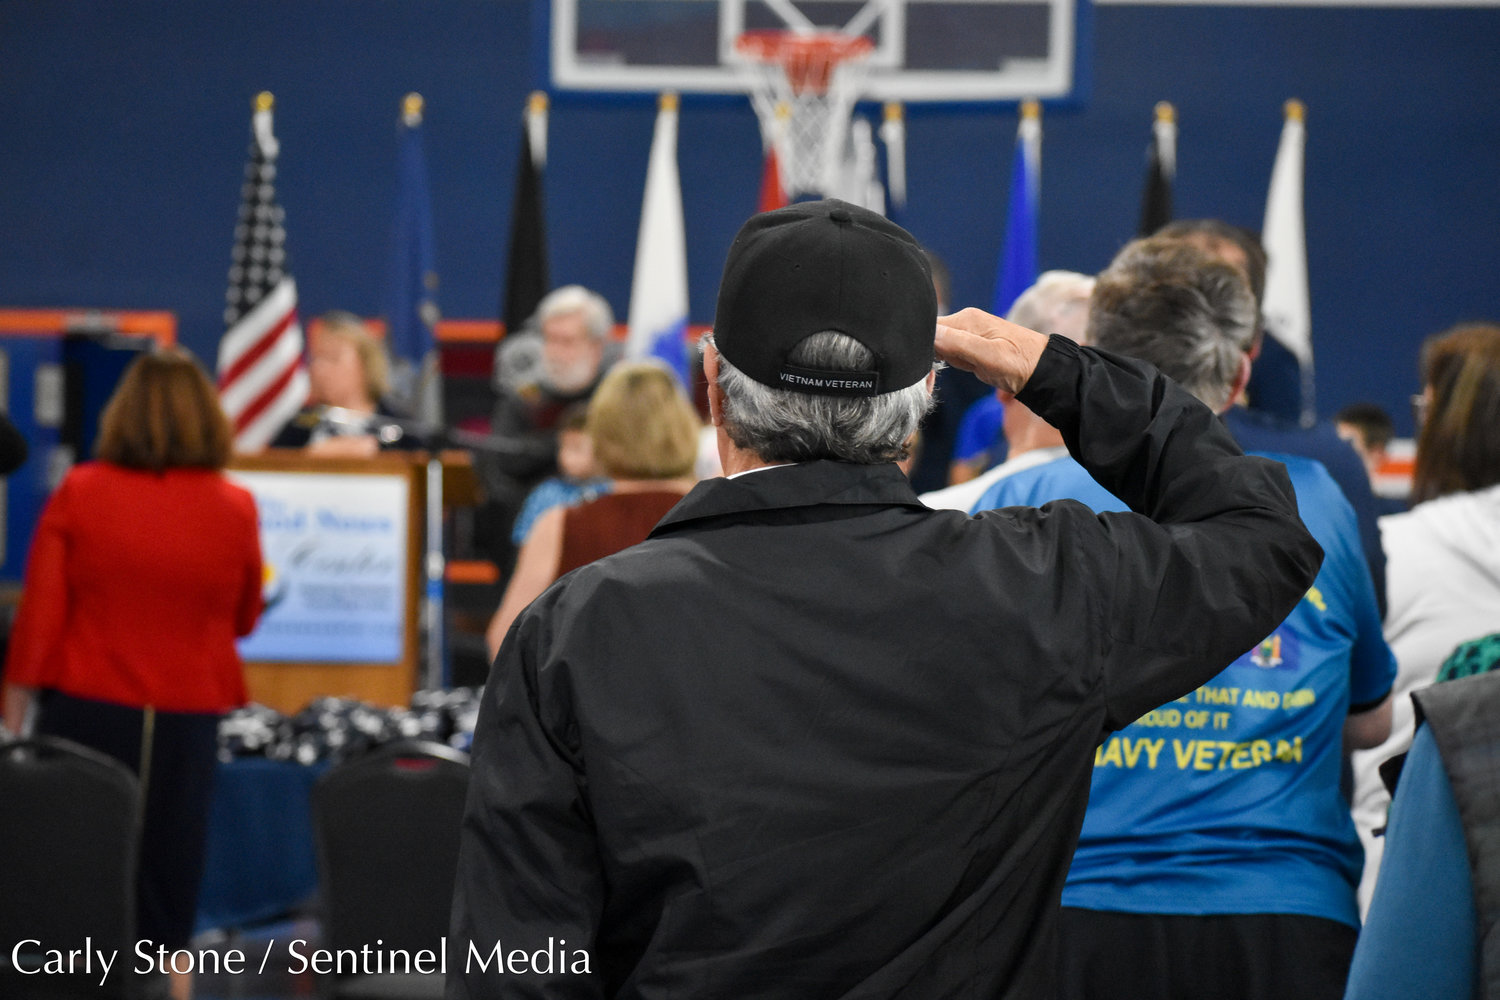 Veterans were honored on Saturday, November 5, 2022, at the Parkway Center in Utica as part of The Good News Center's 8th Annual Recognition Ceremony.